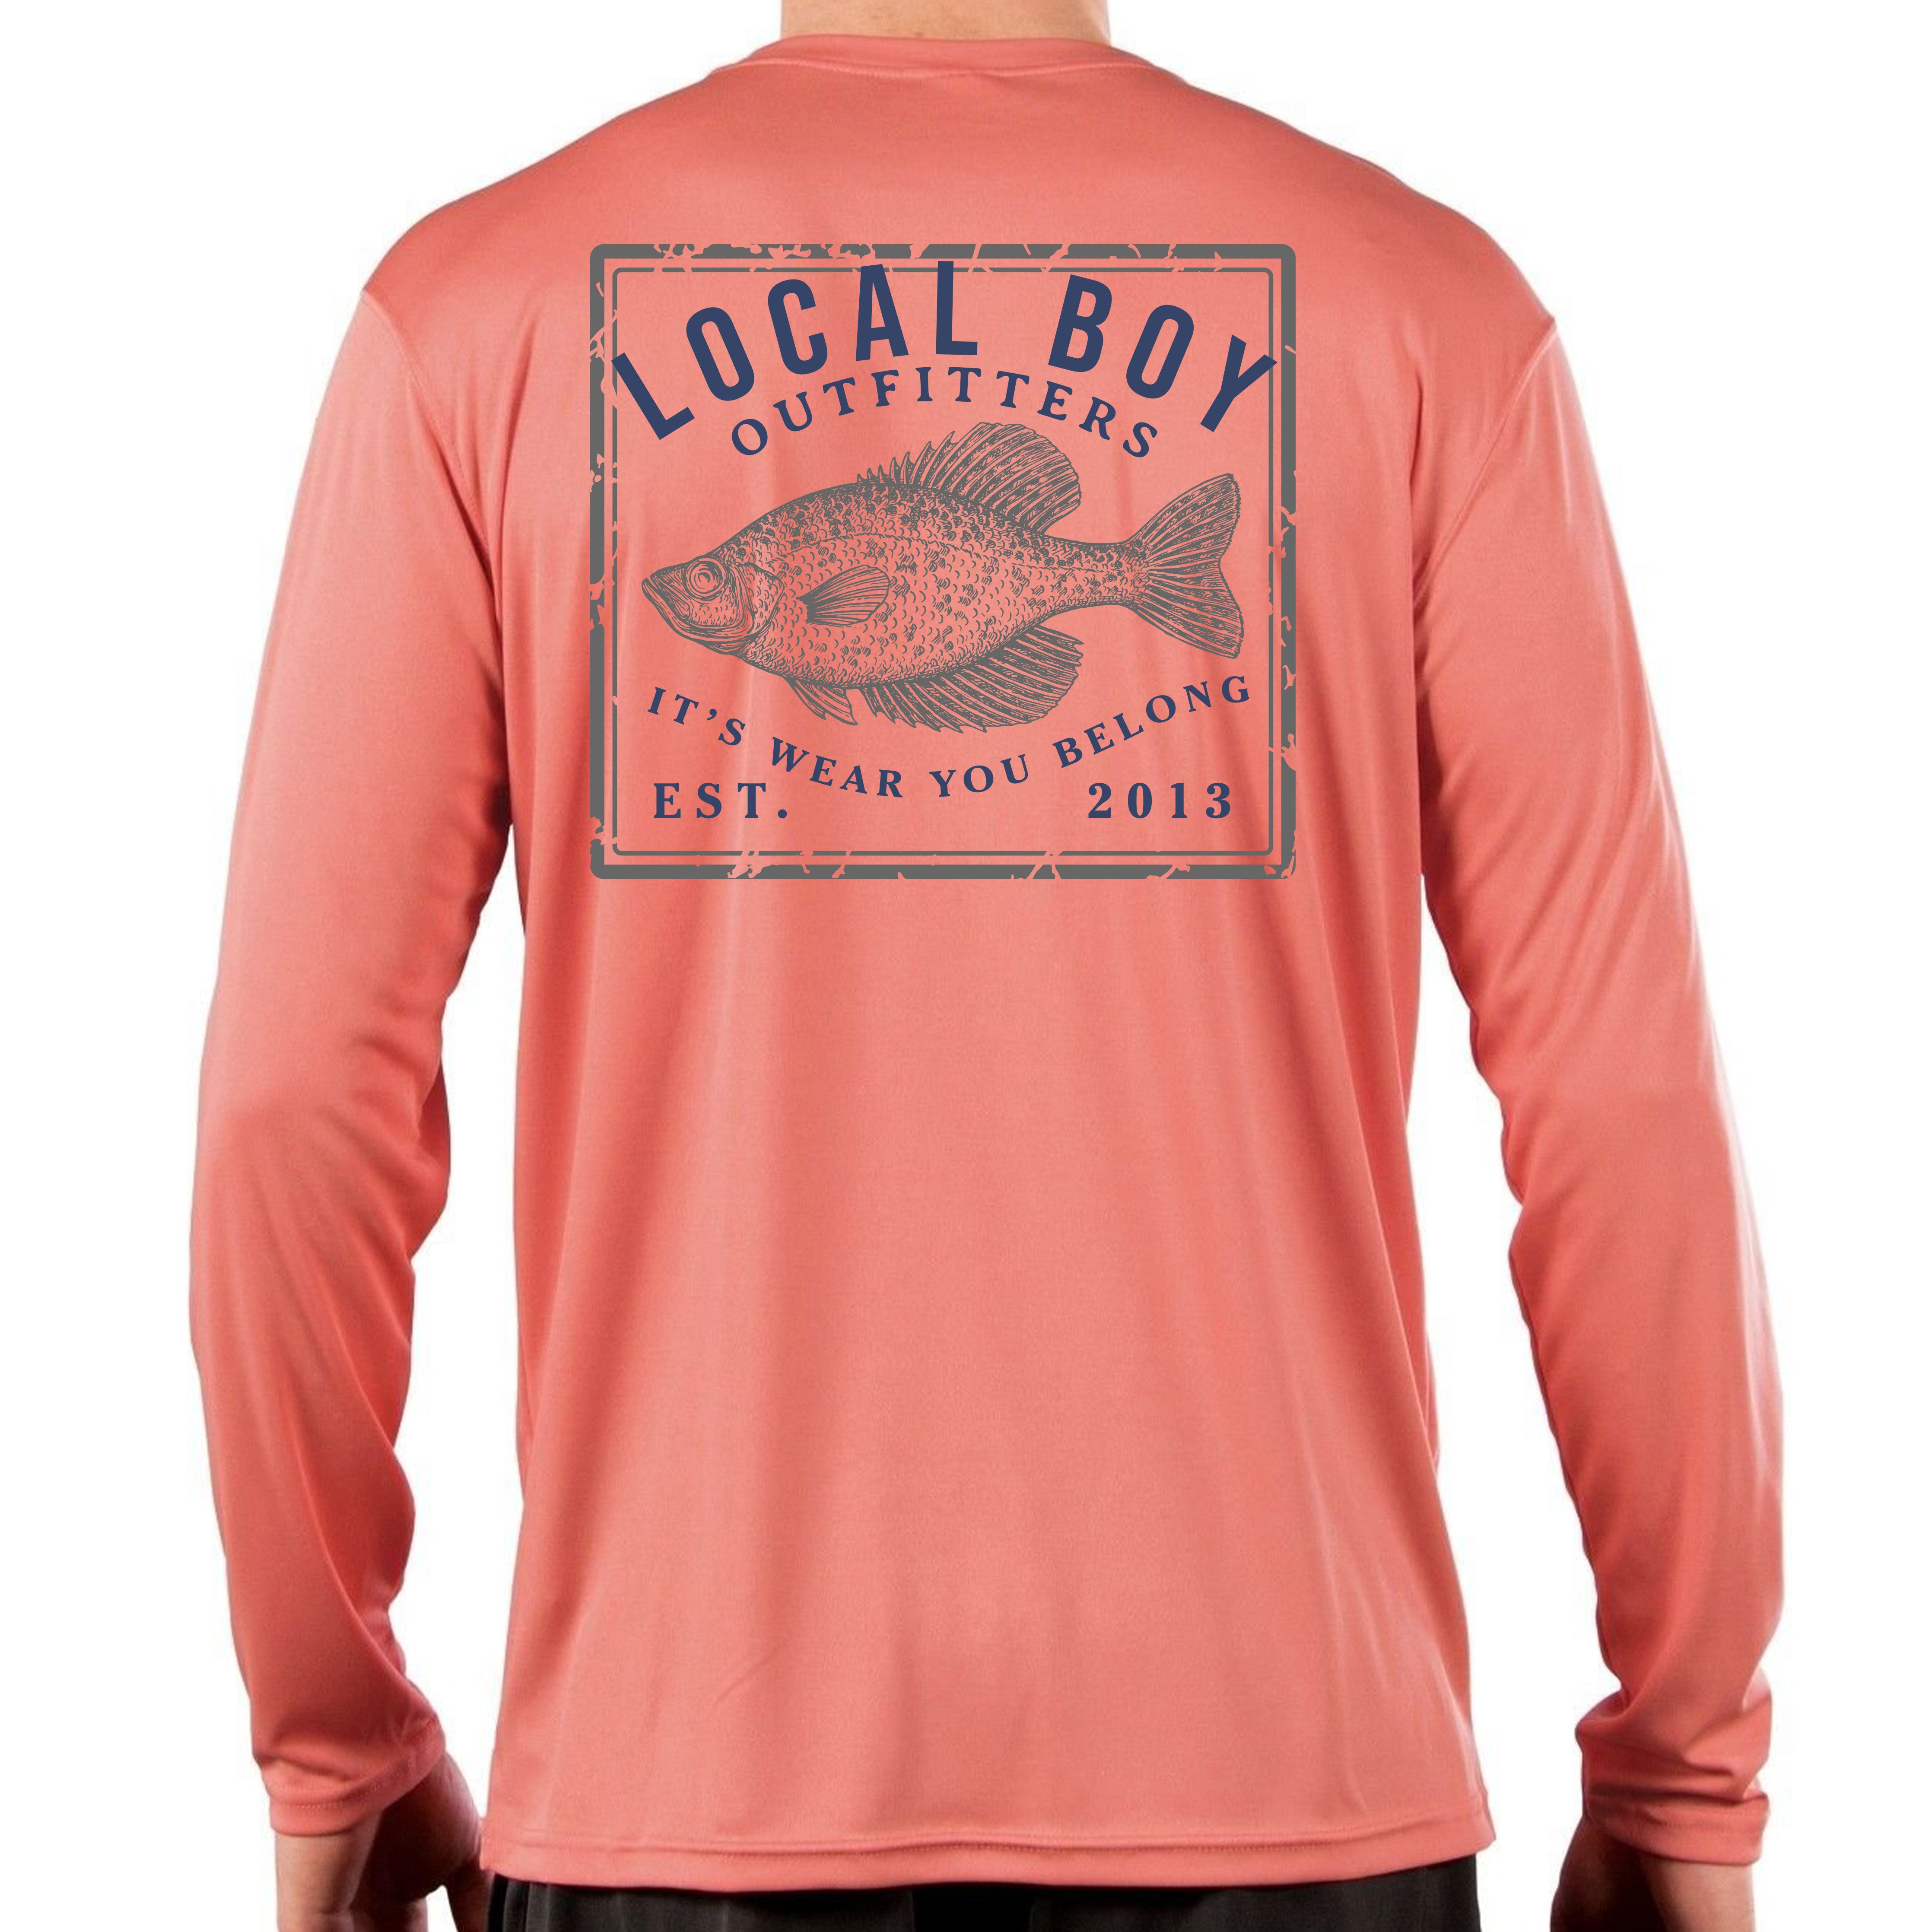 Holy Crappie Performance T-shirt – Local Boy Outfitters